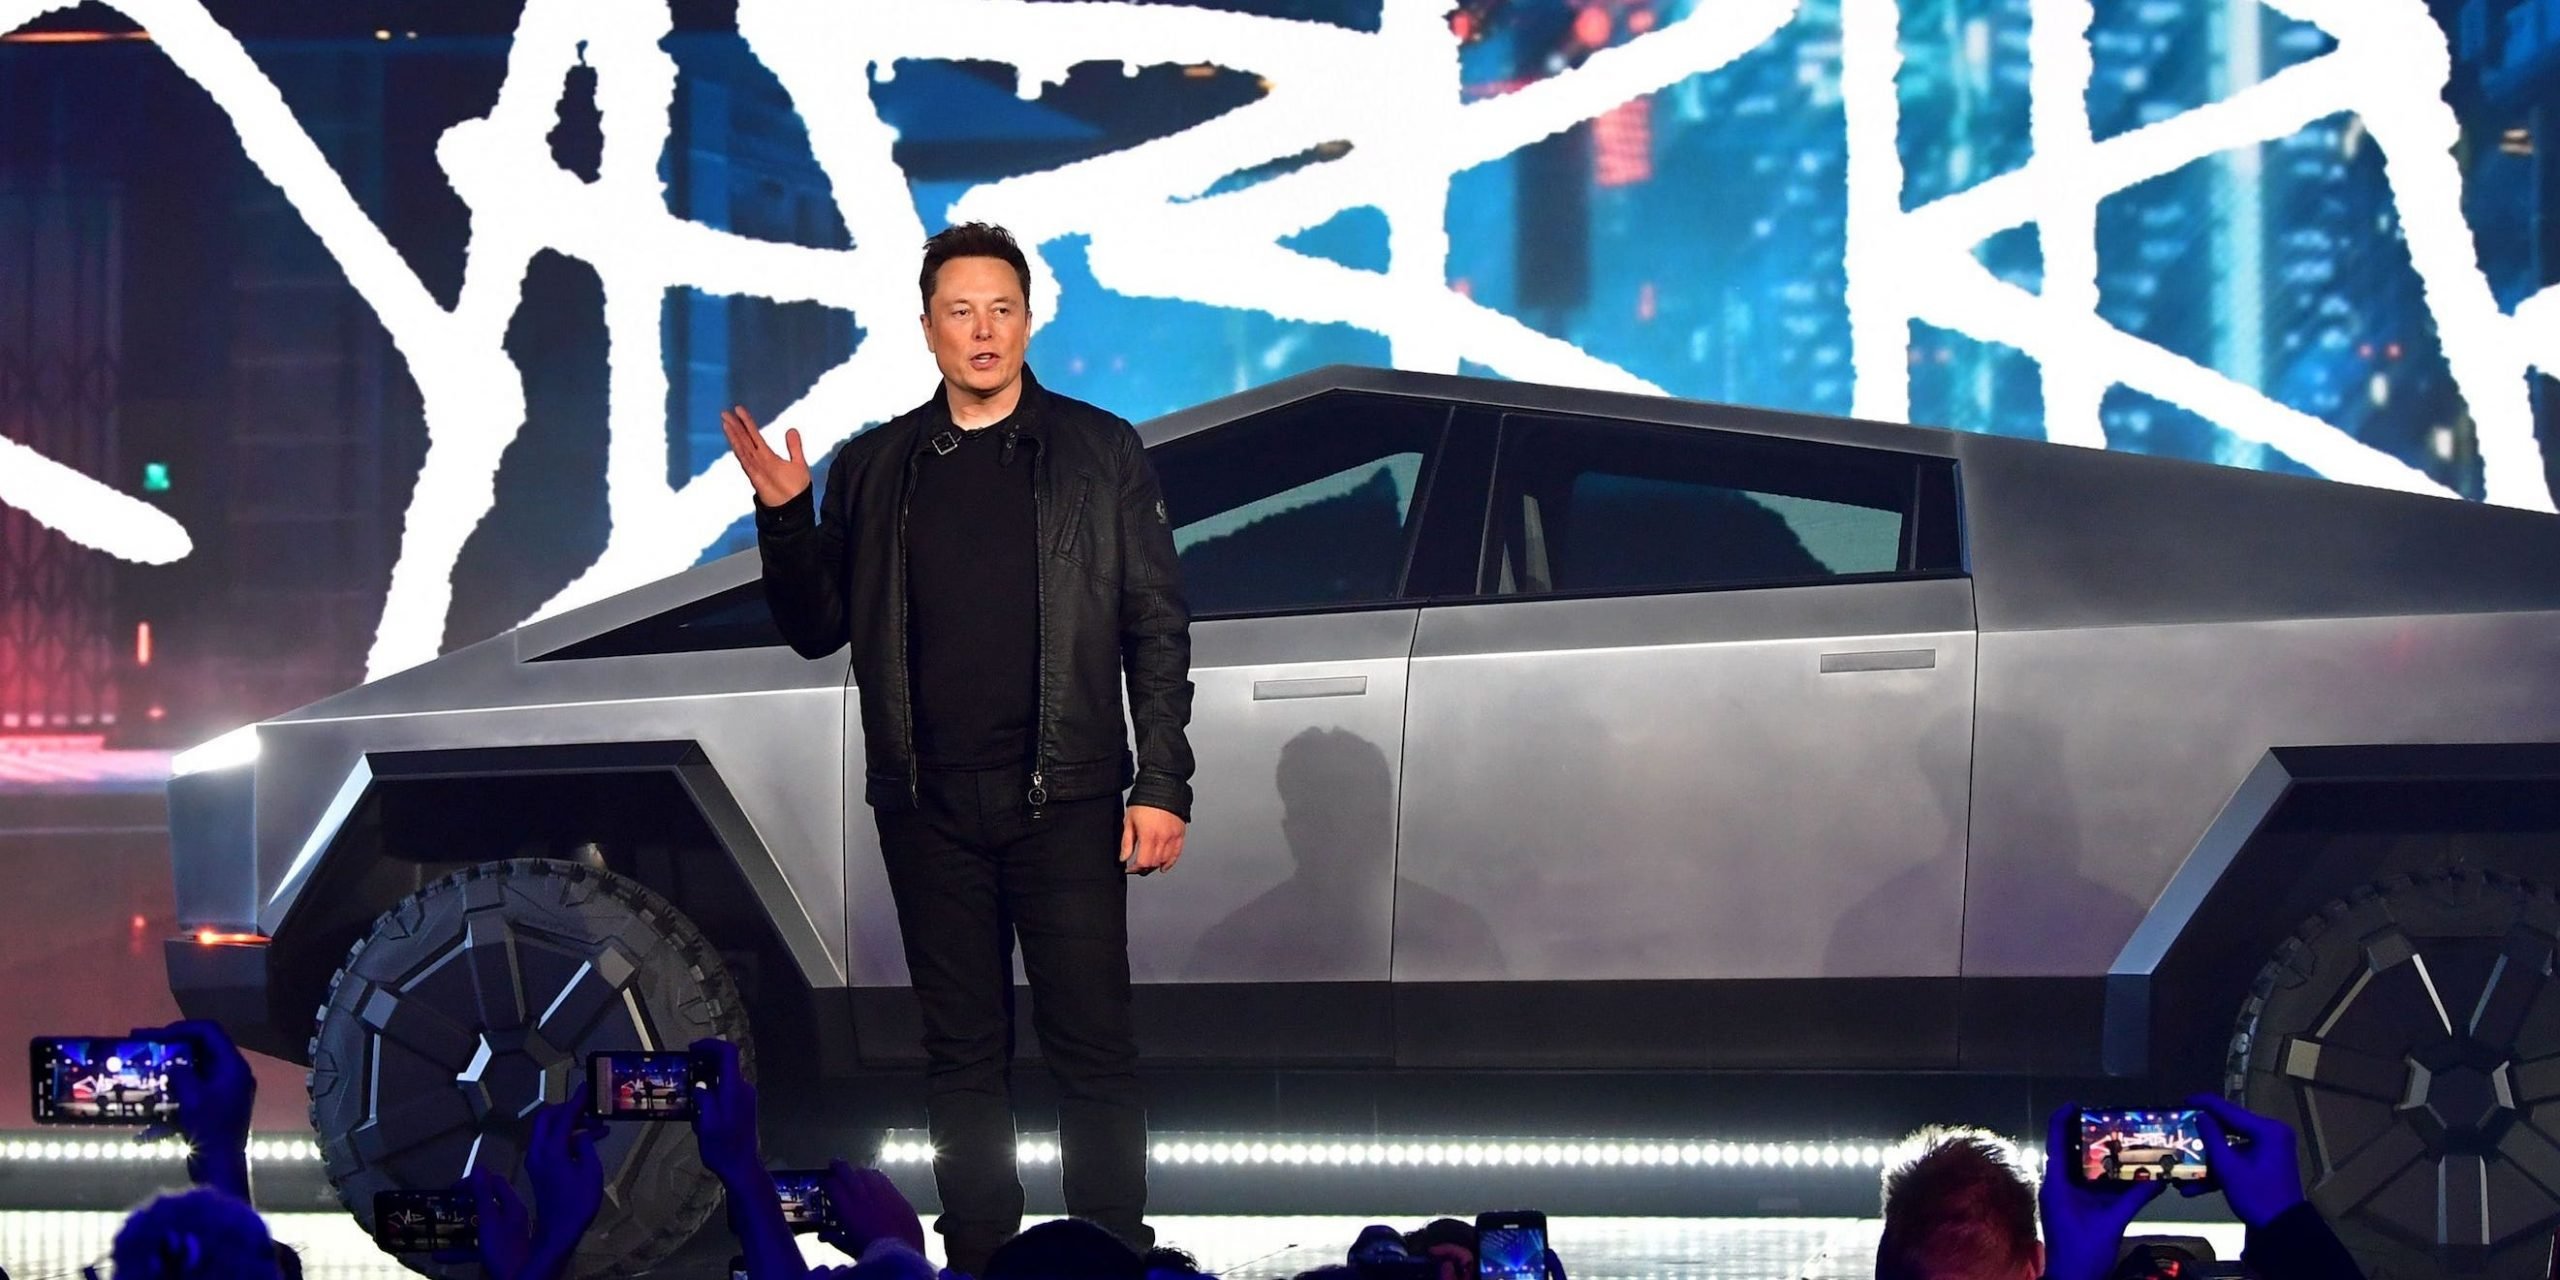 Tesla CEO Elon Musk stands in front of the company's Cybertruck.